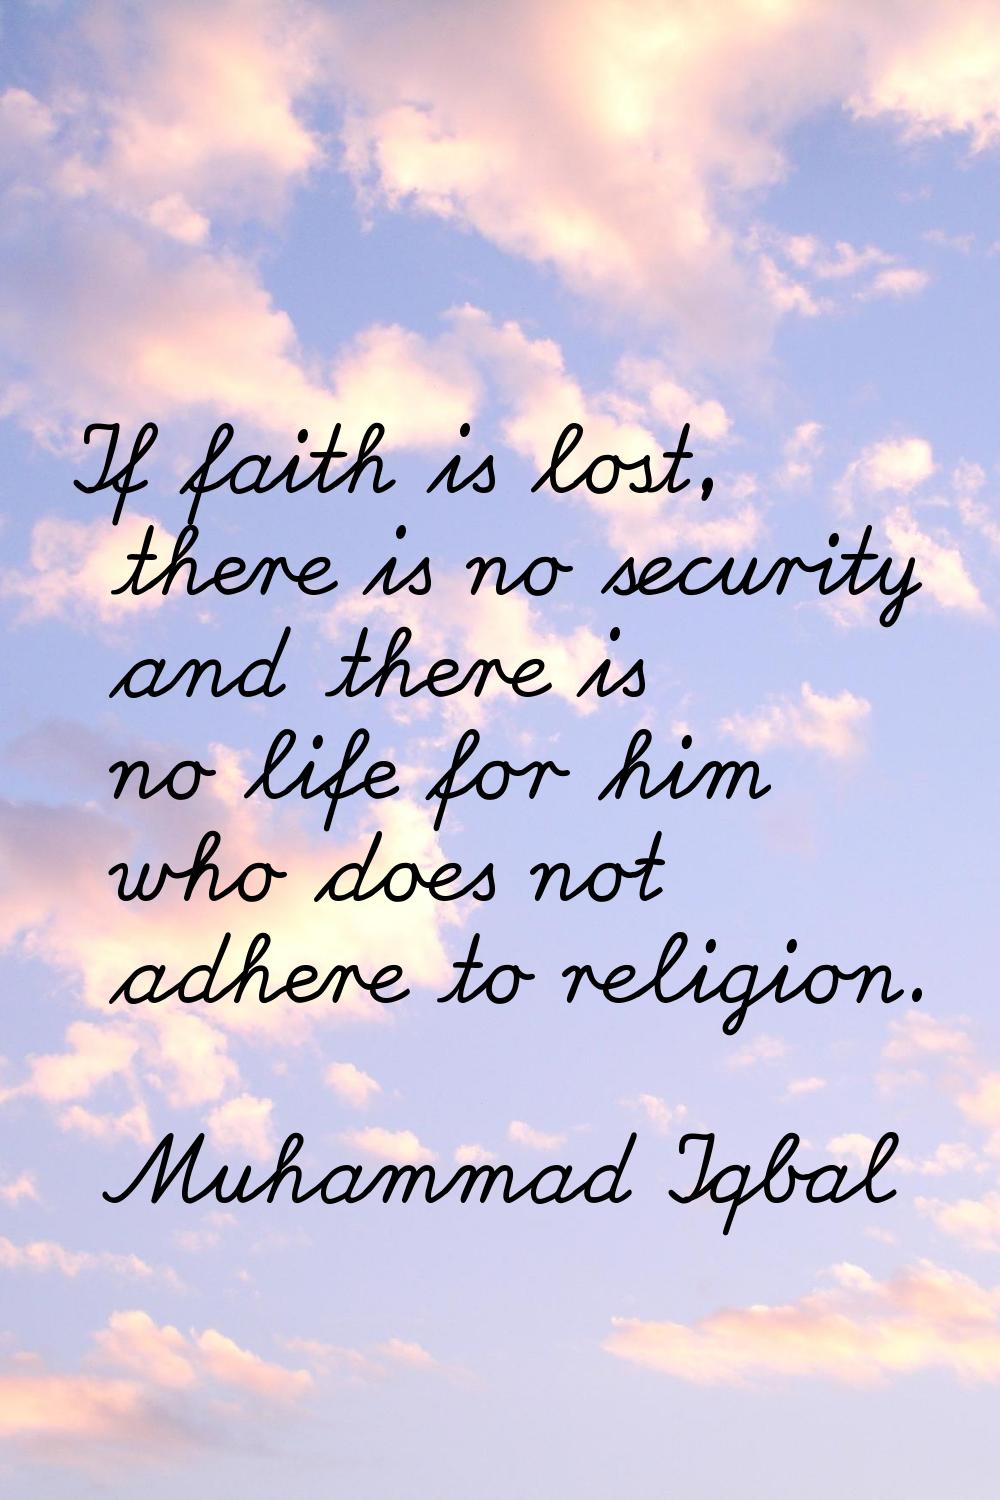 If faith is lost, there is no security and there is no life for him who does not adhere to religion